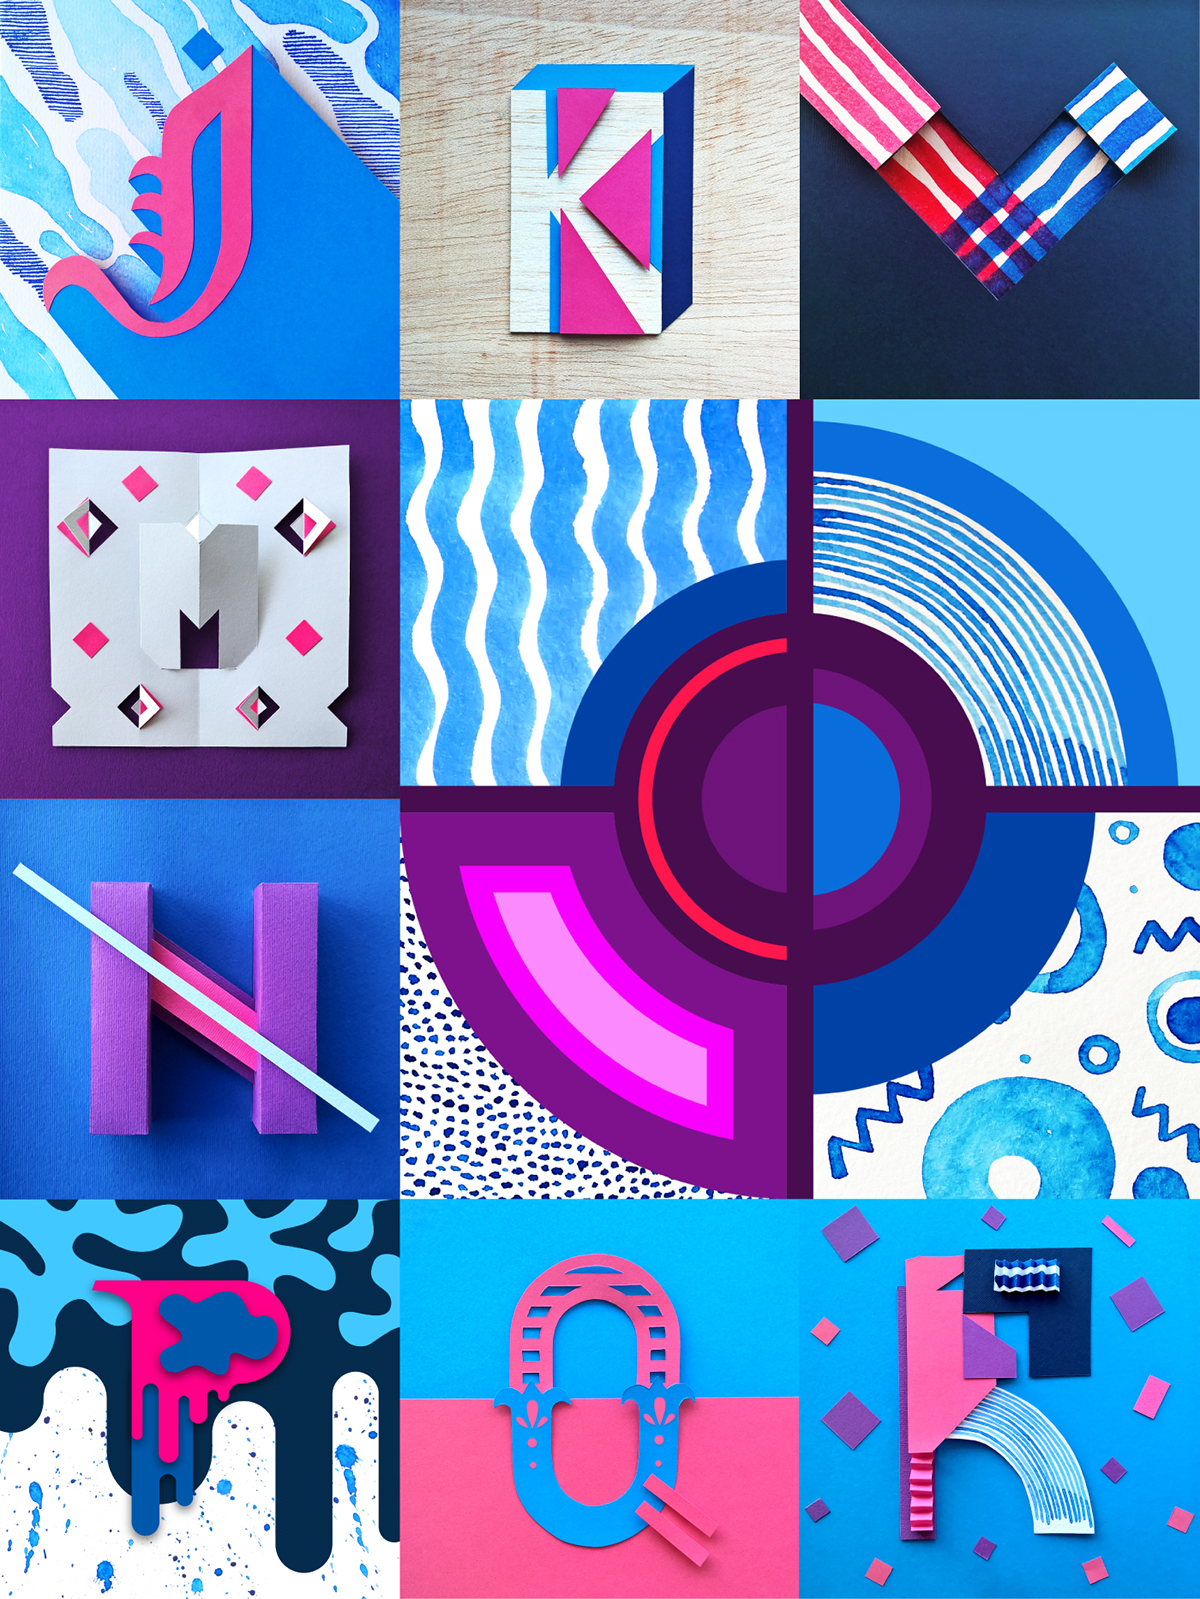 36daysoftype 36days type Typeface paper pattern collage 3D Type numbers alphabet